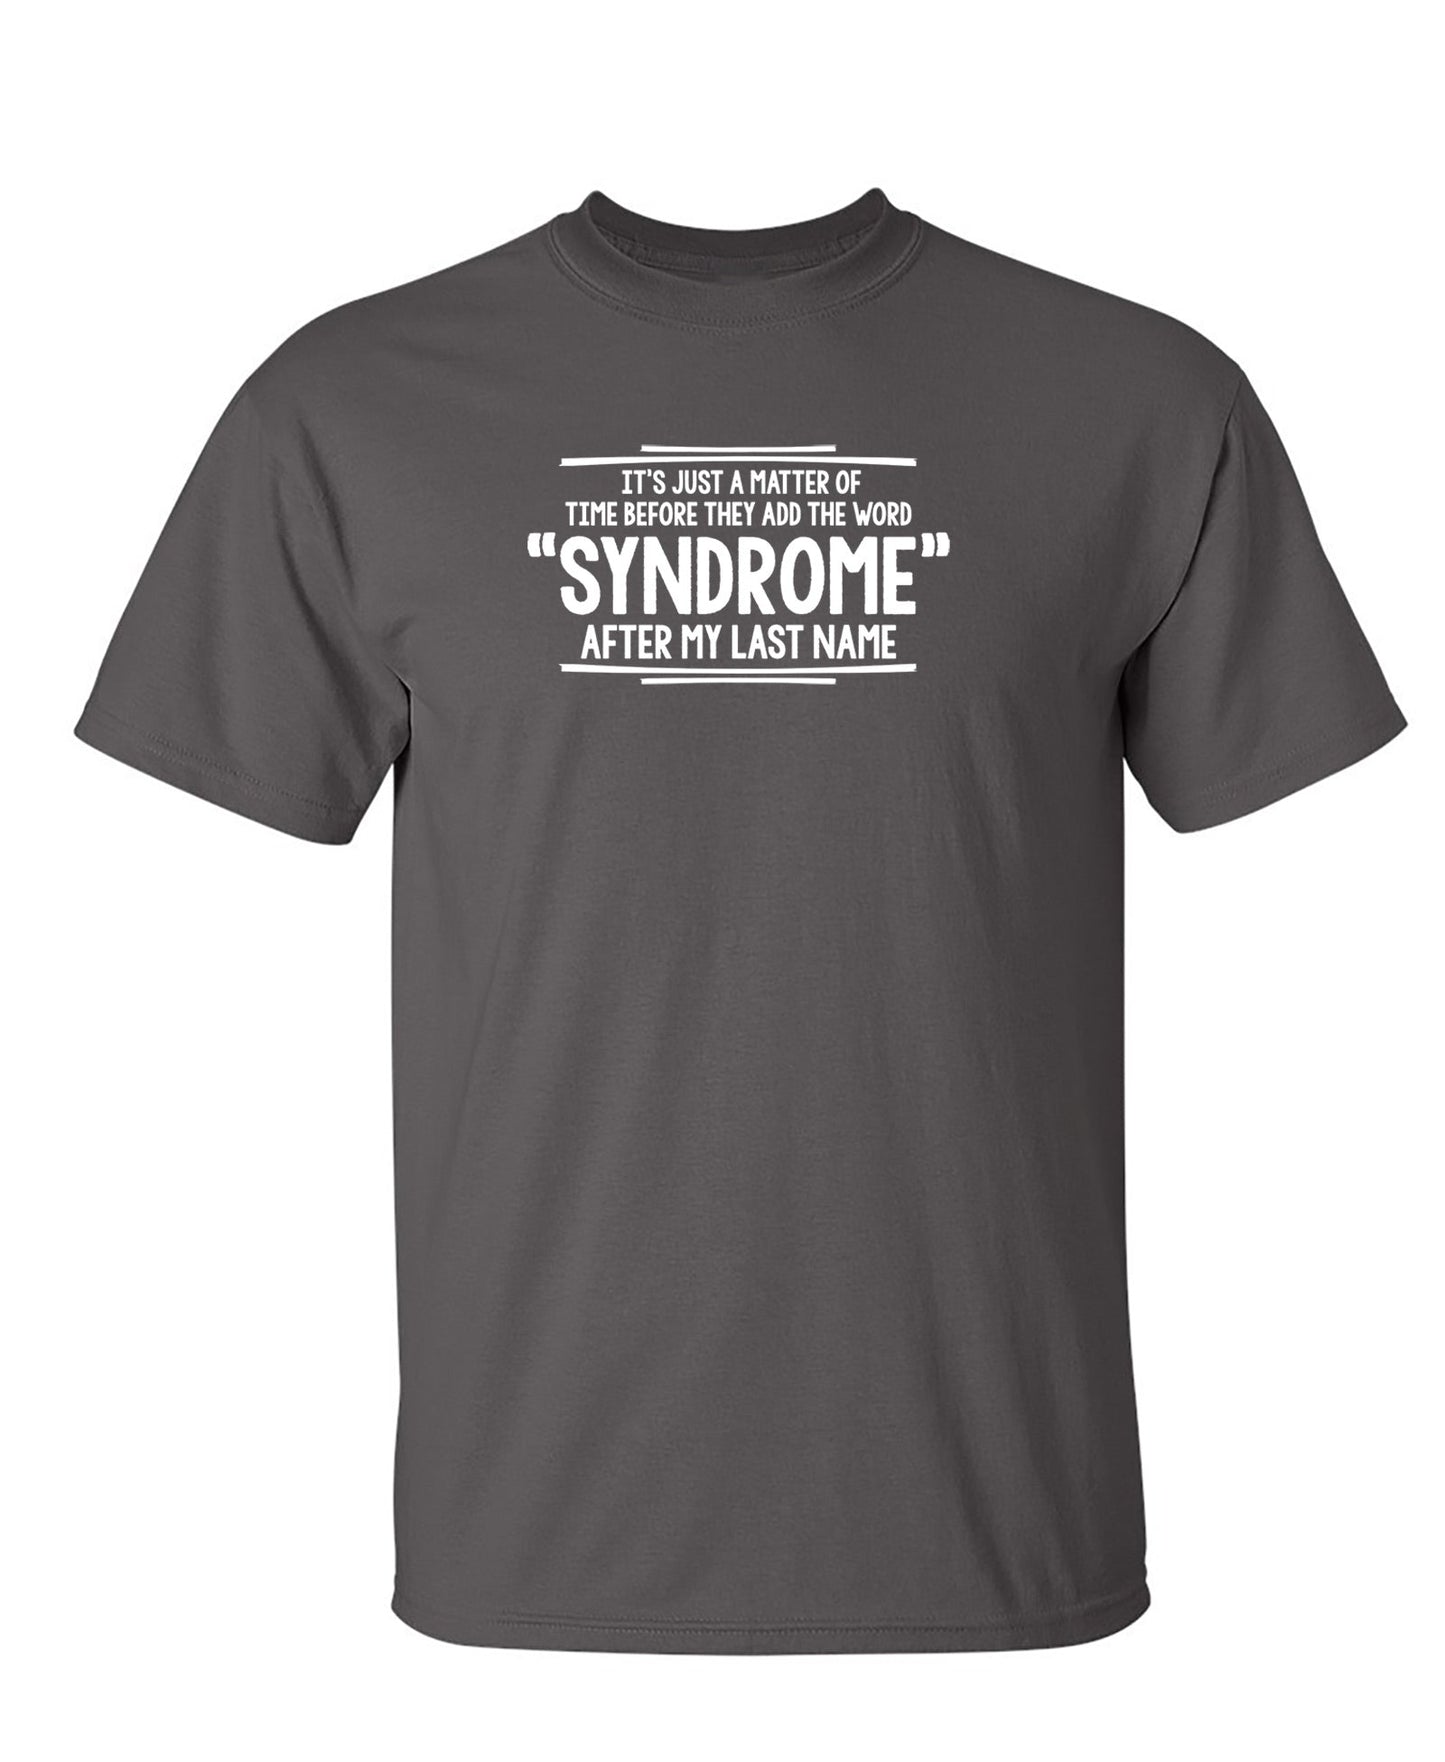 It's Just A Matter of Time Before They Add The Word Syndrome After My Last Name - Funny T Shirts & Graphic Tees